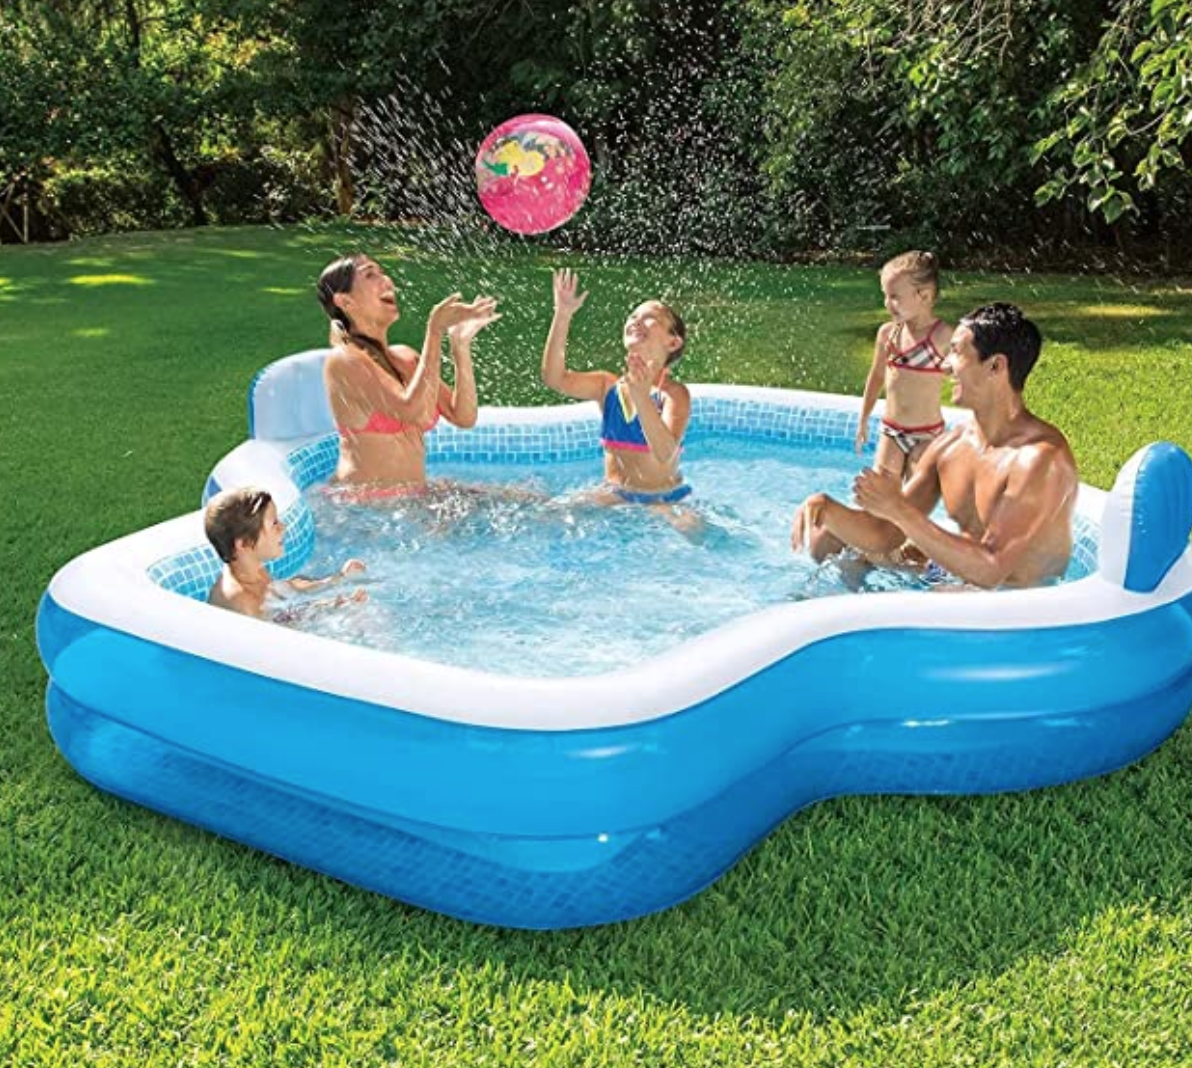 New Version 2021 Members Mark Elegant Family Pool 10 Feet Long 2 Inflatable Seats with Backrests 